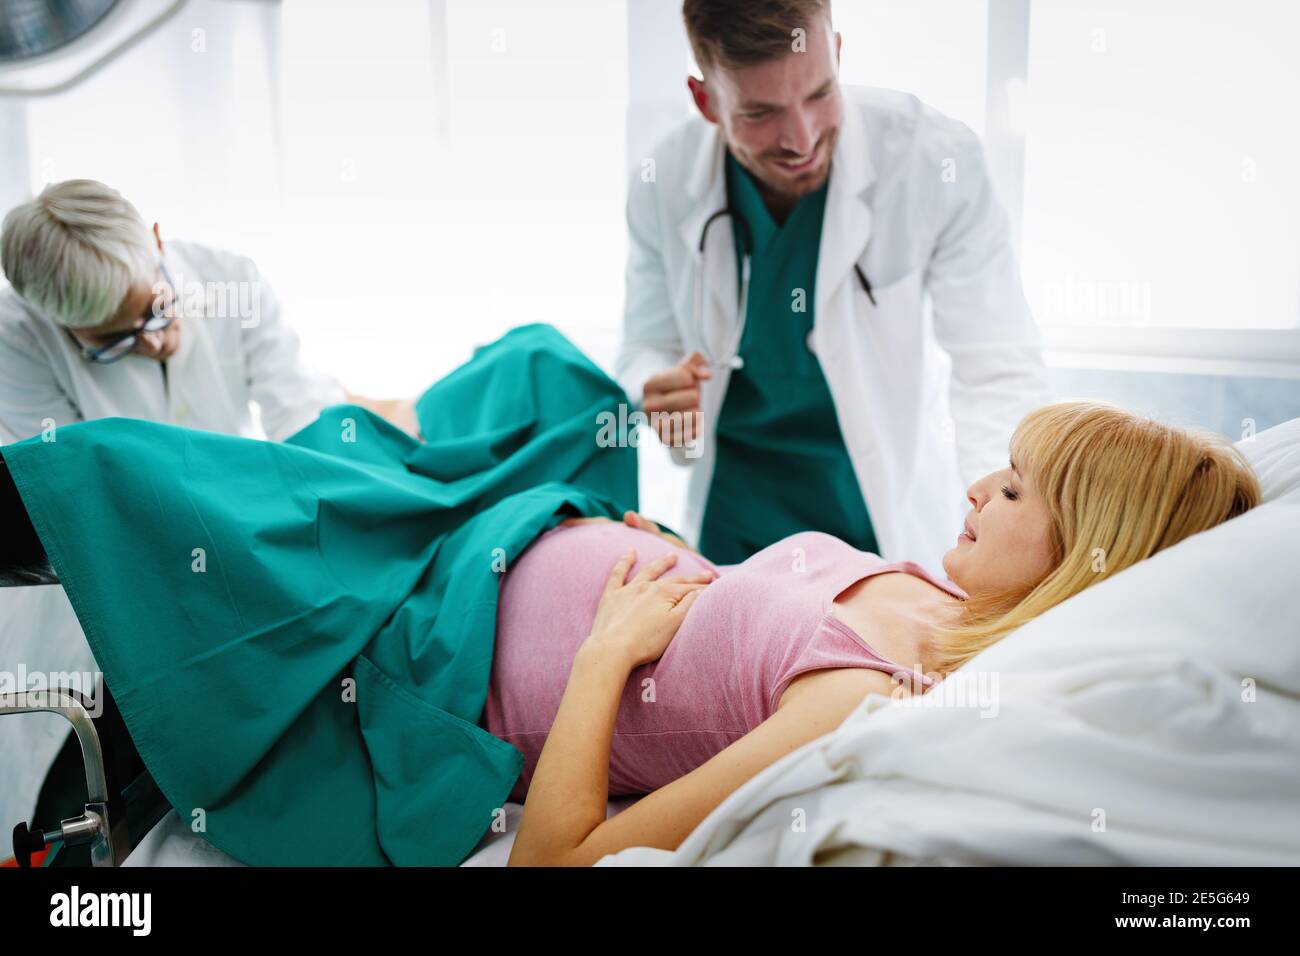 https://c8.alamy.com/comp/2E5G649/woman-giving-birth-in-hospital-with-medical-team-2E5G649.jpg